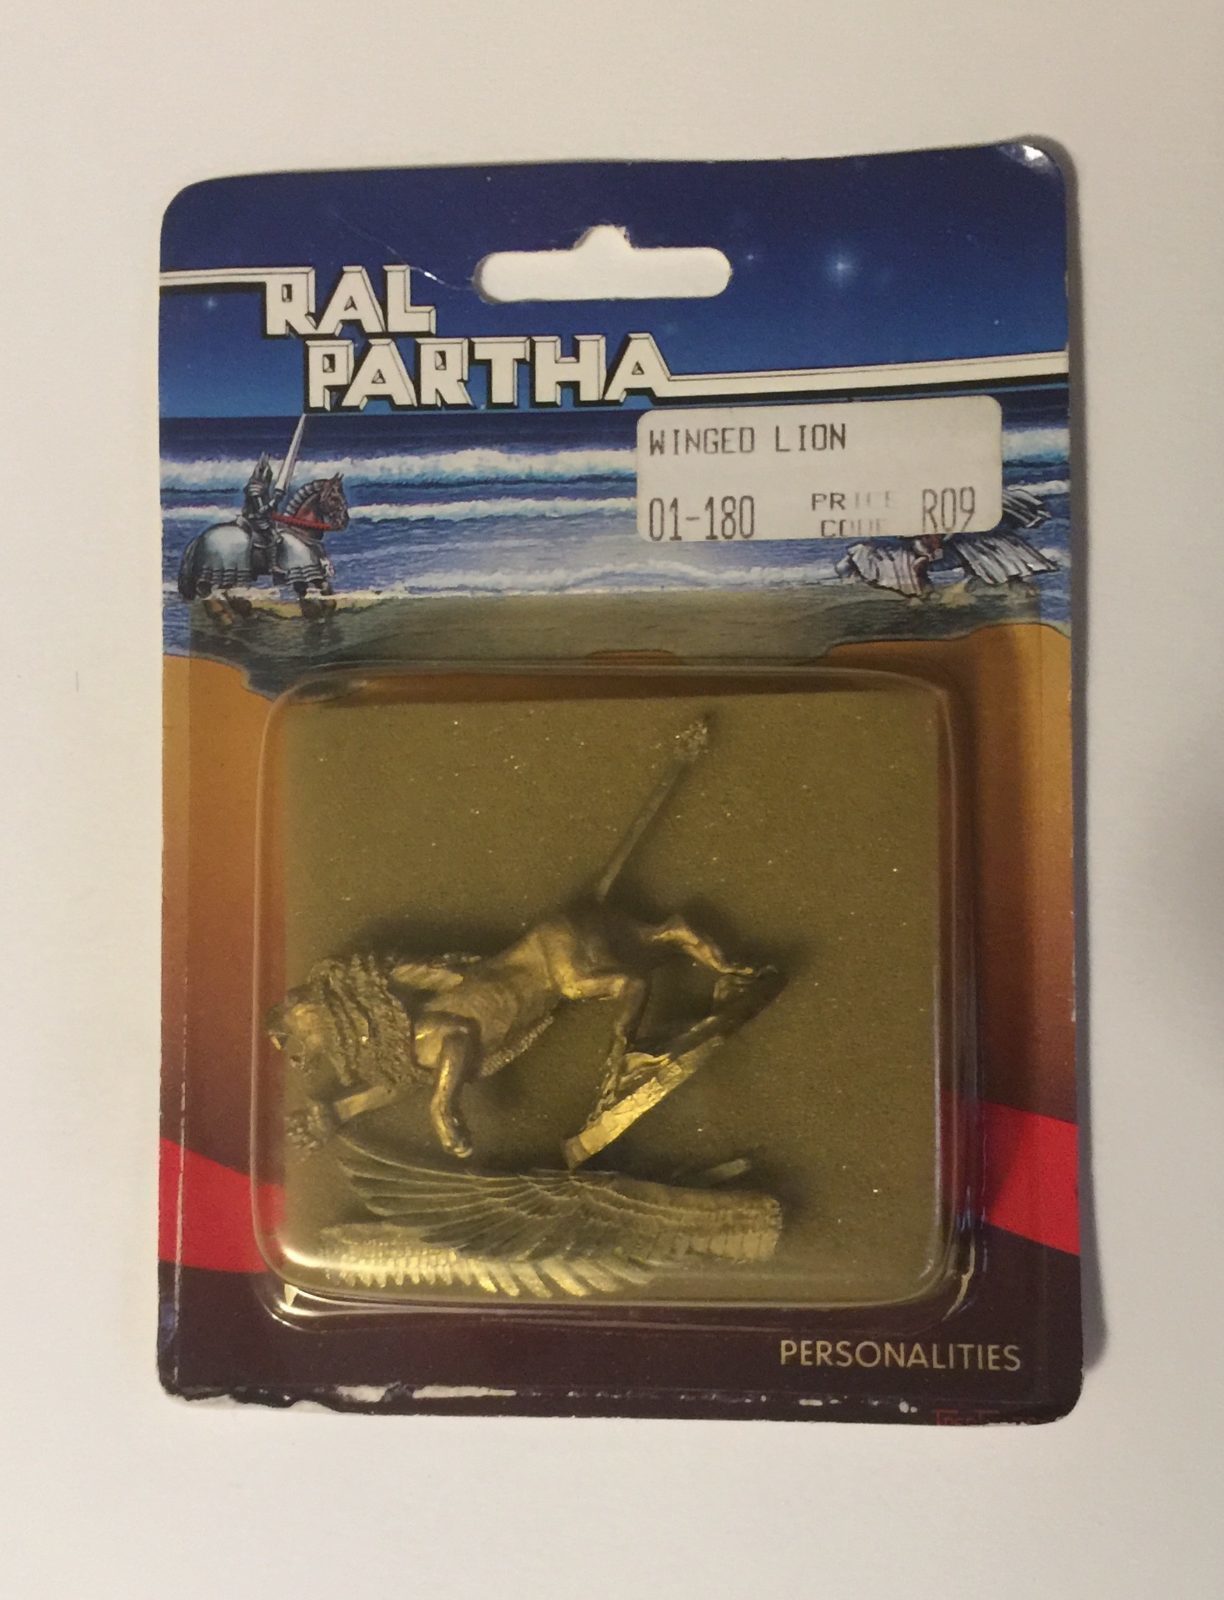 Ral Partha Winged Lion